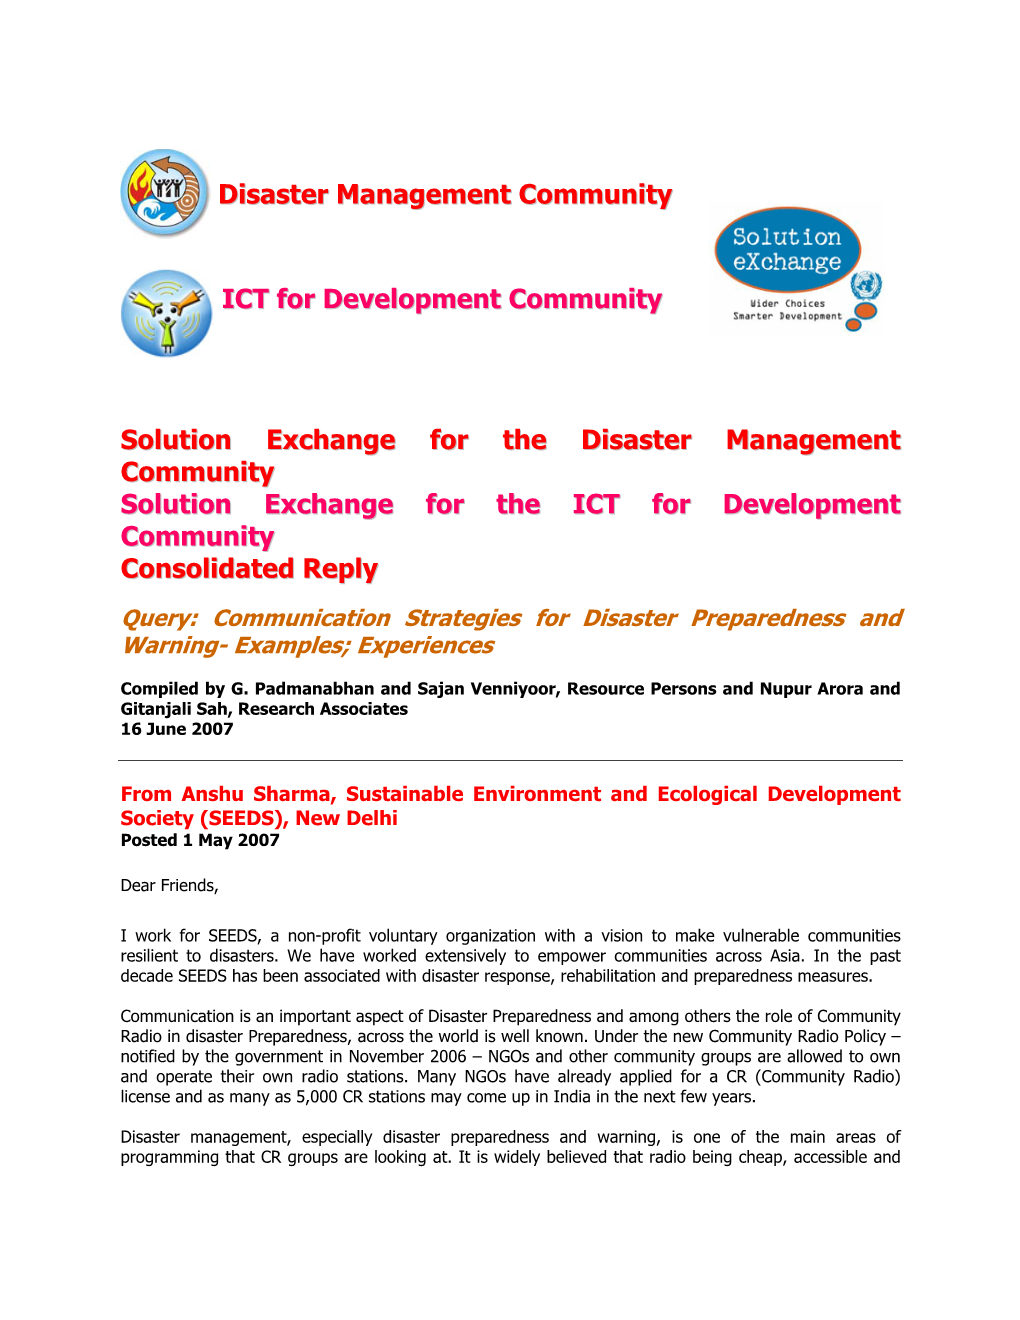 Disaster Management Community ICT for Development Community Solution Exchange for the Disaster Management Community Solution